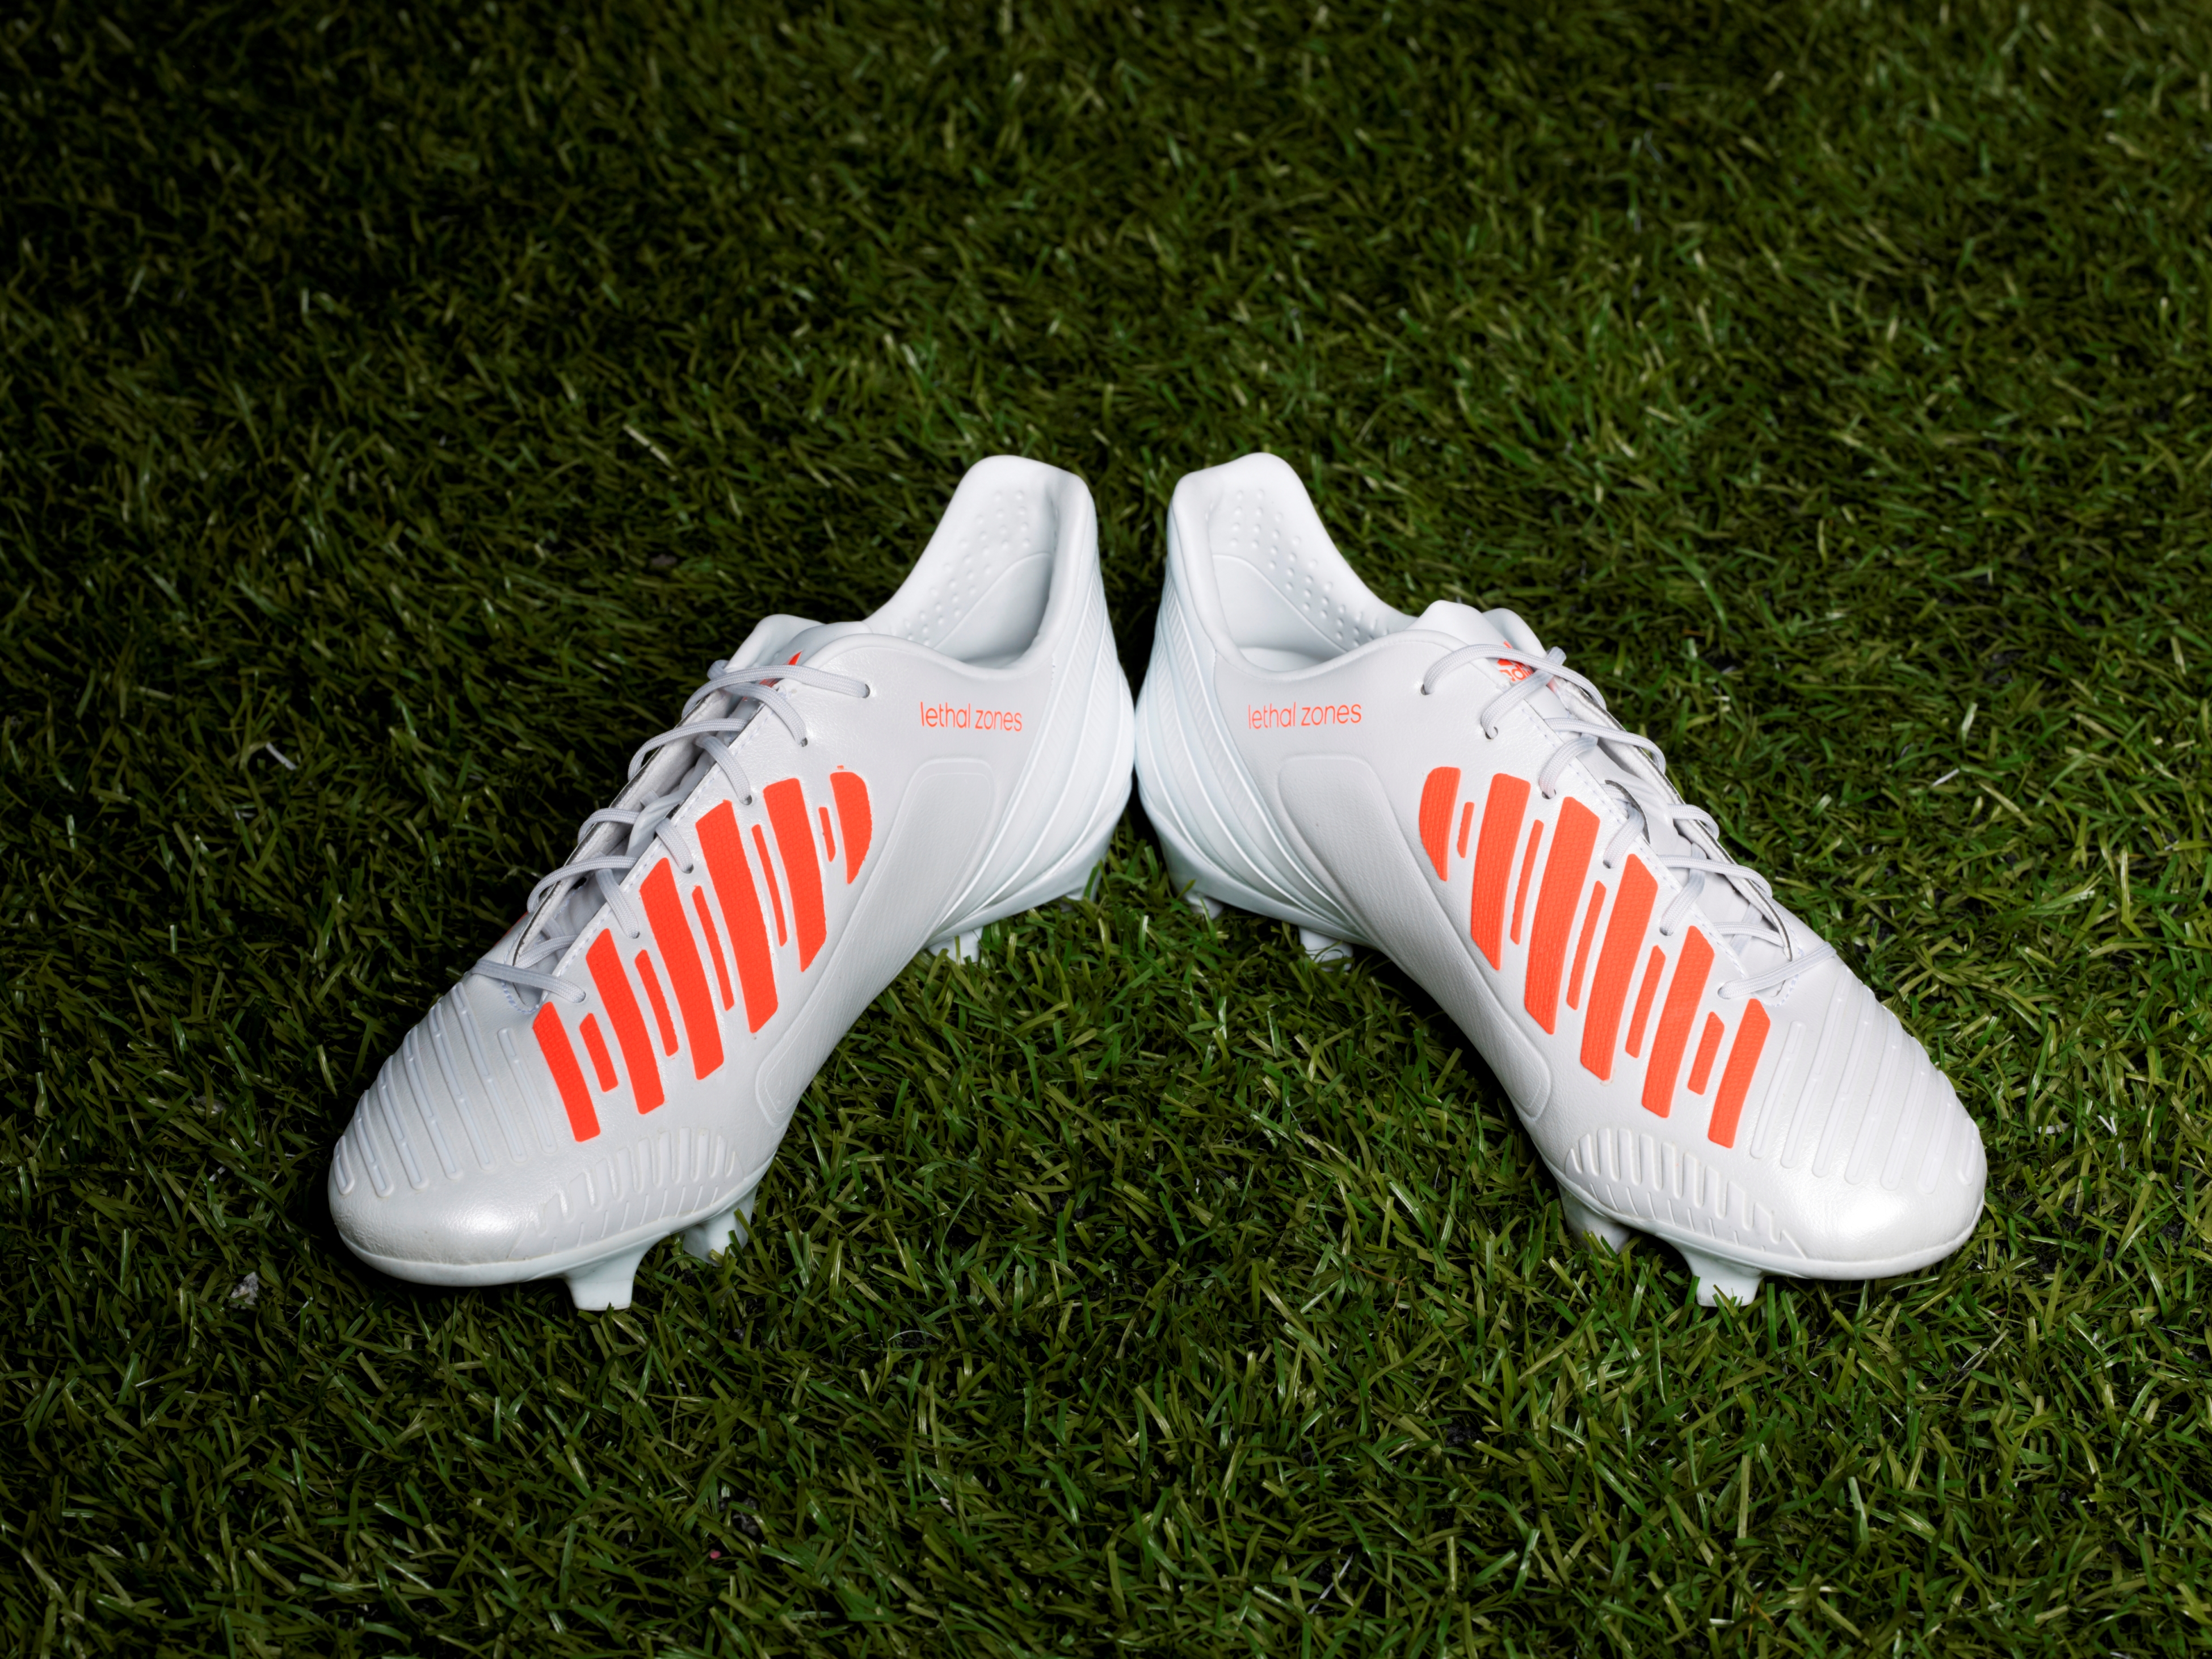 Football boot release adidas Predator LZ (Lethal Zones) – the name is Drive